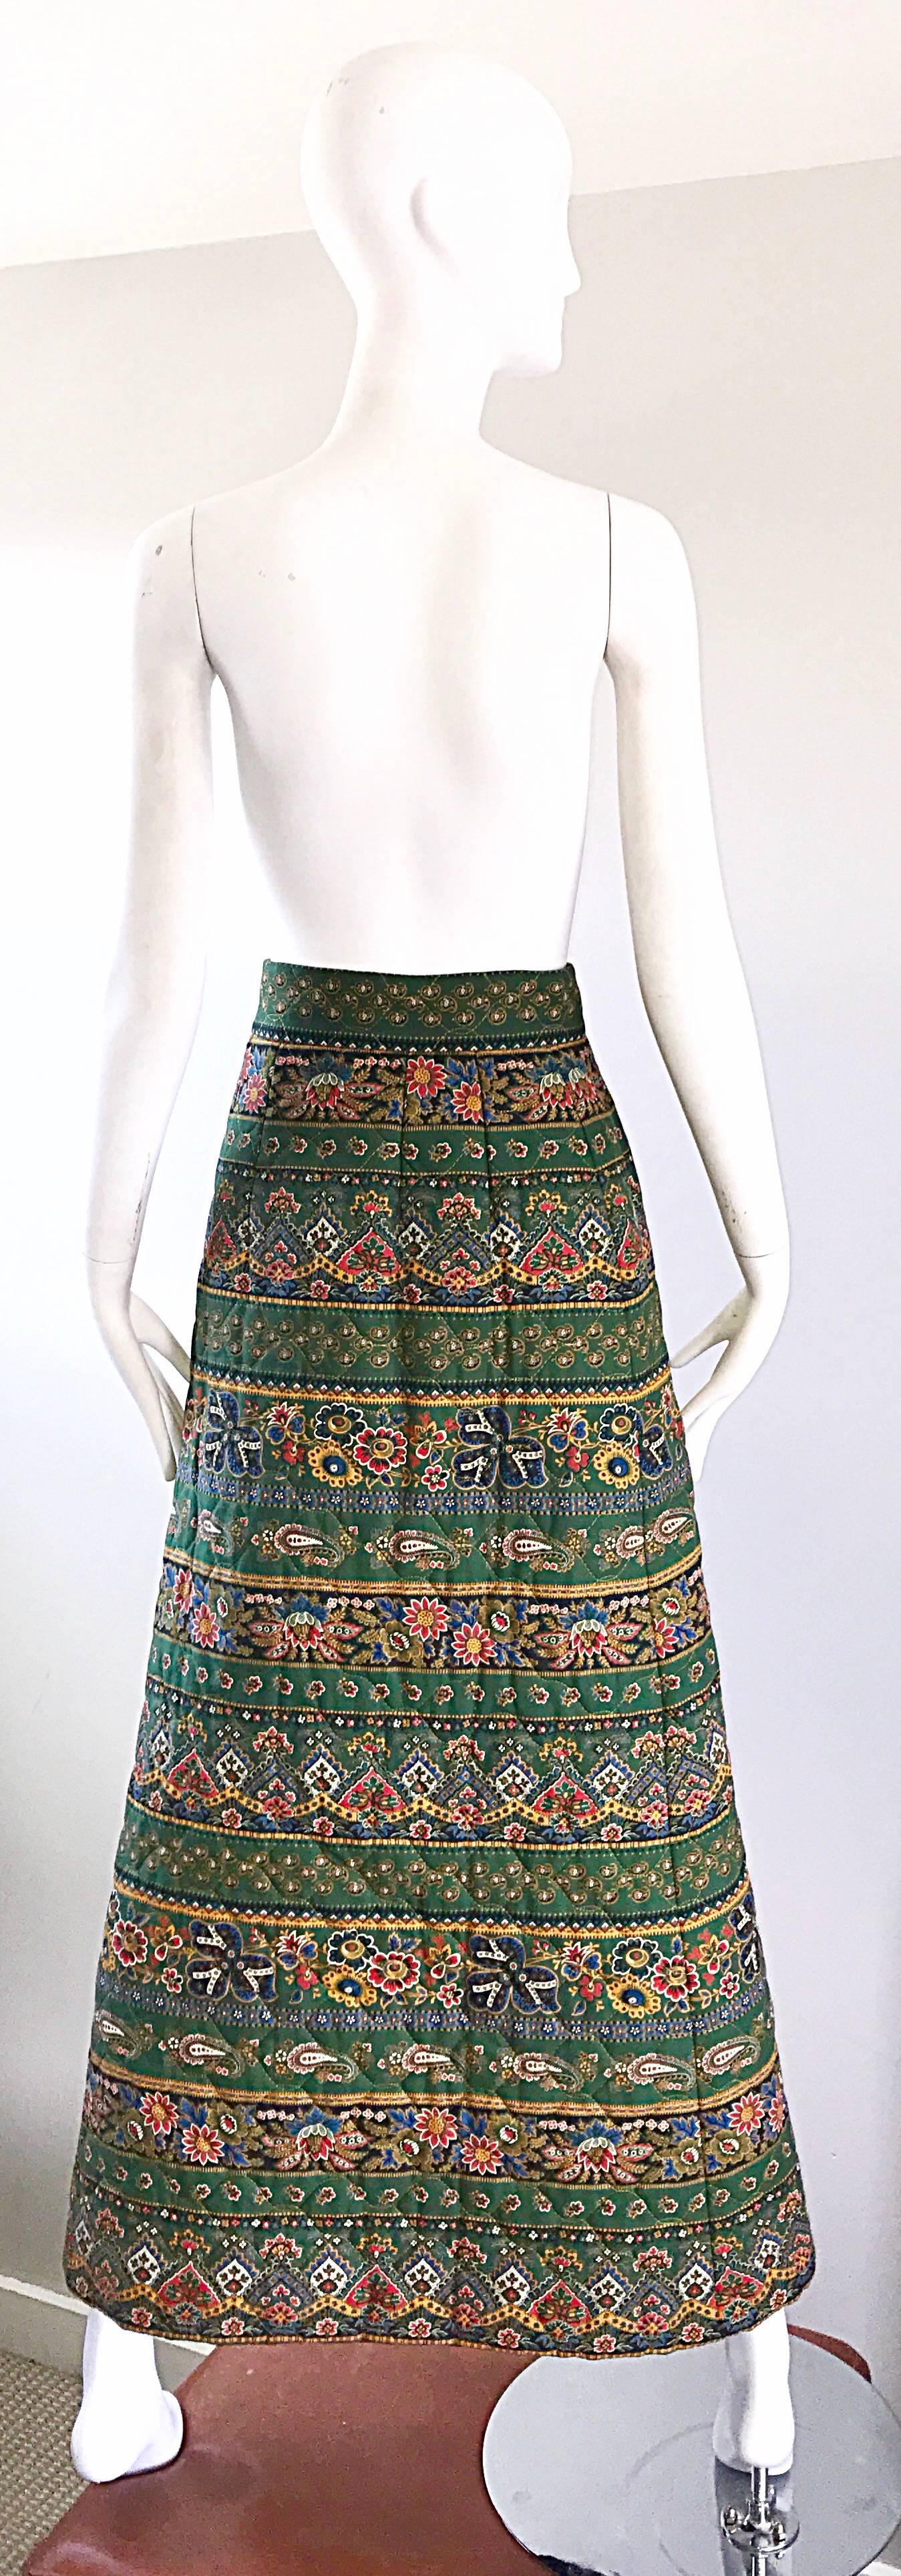 wrap around skirts from the 70s